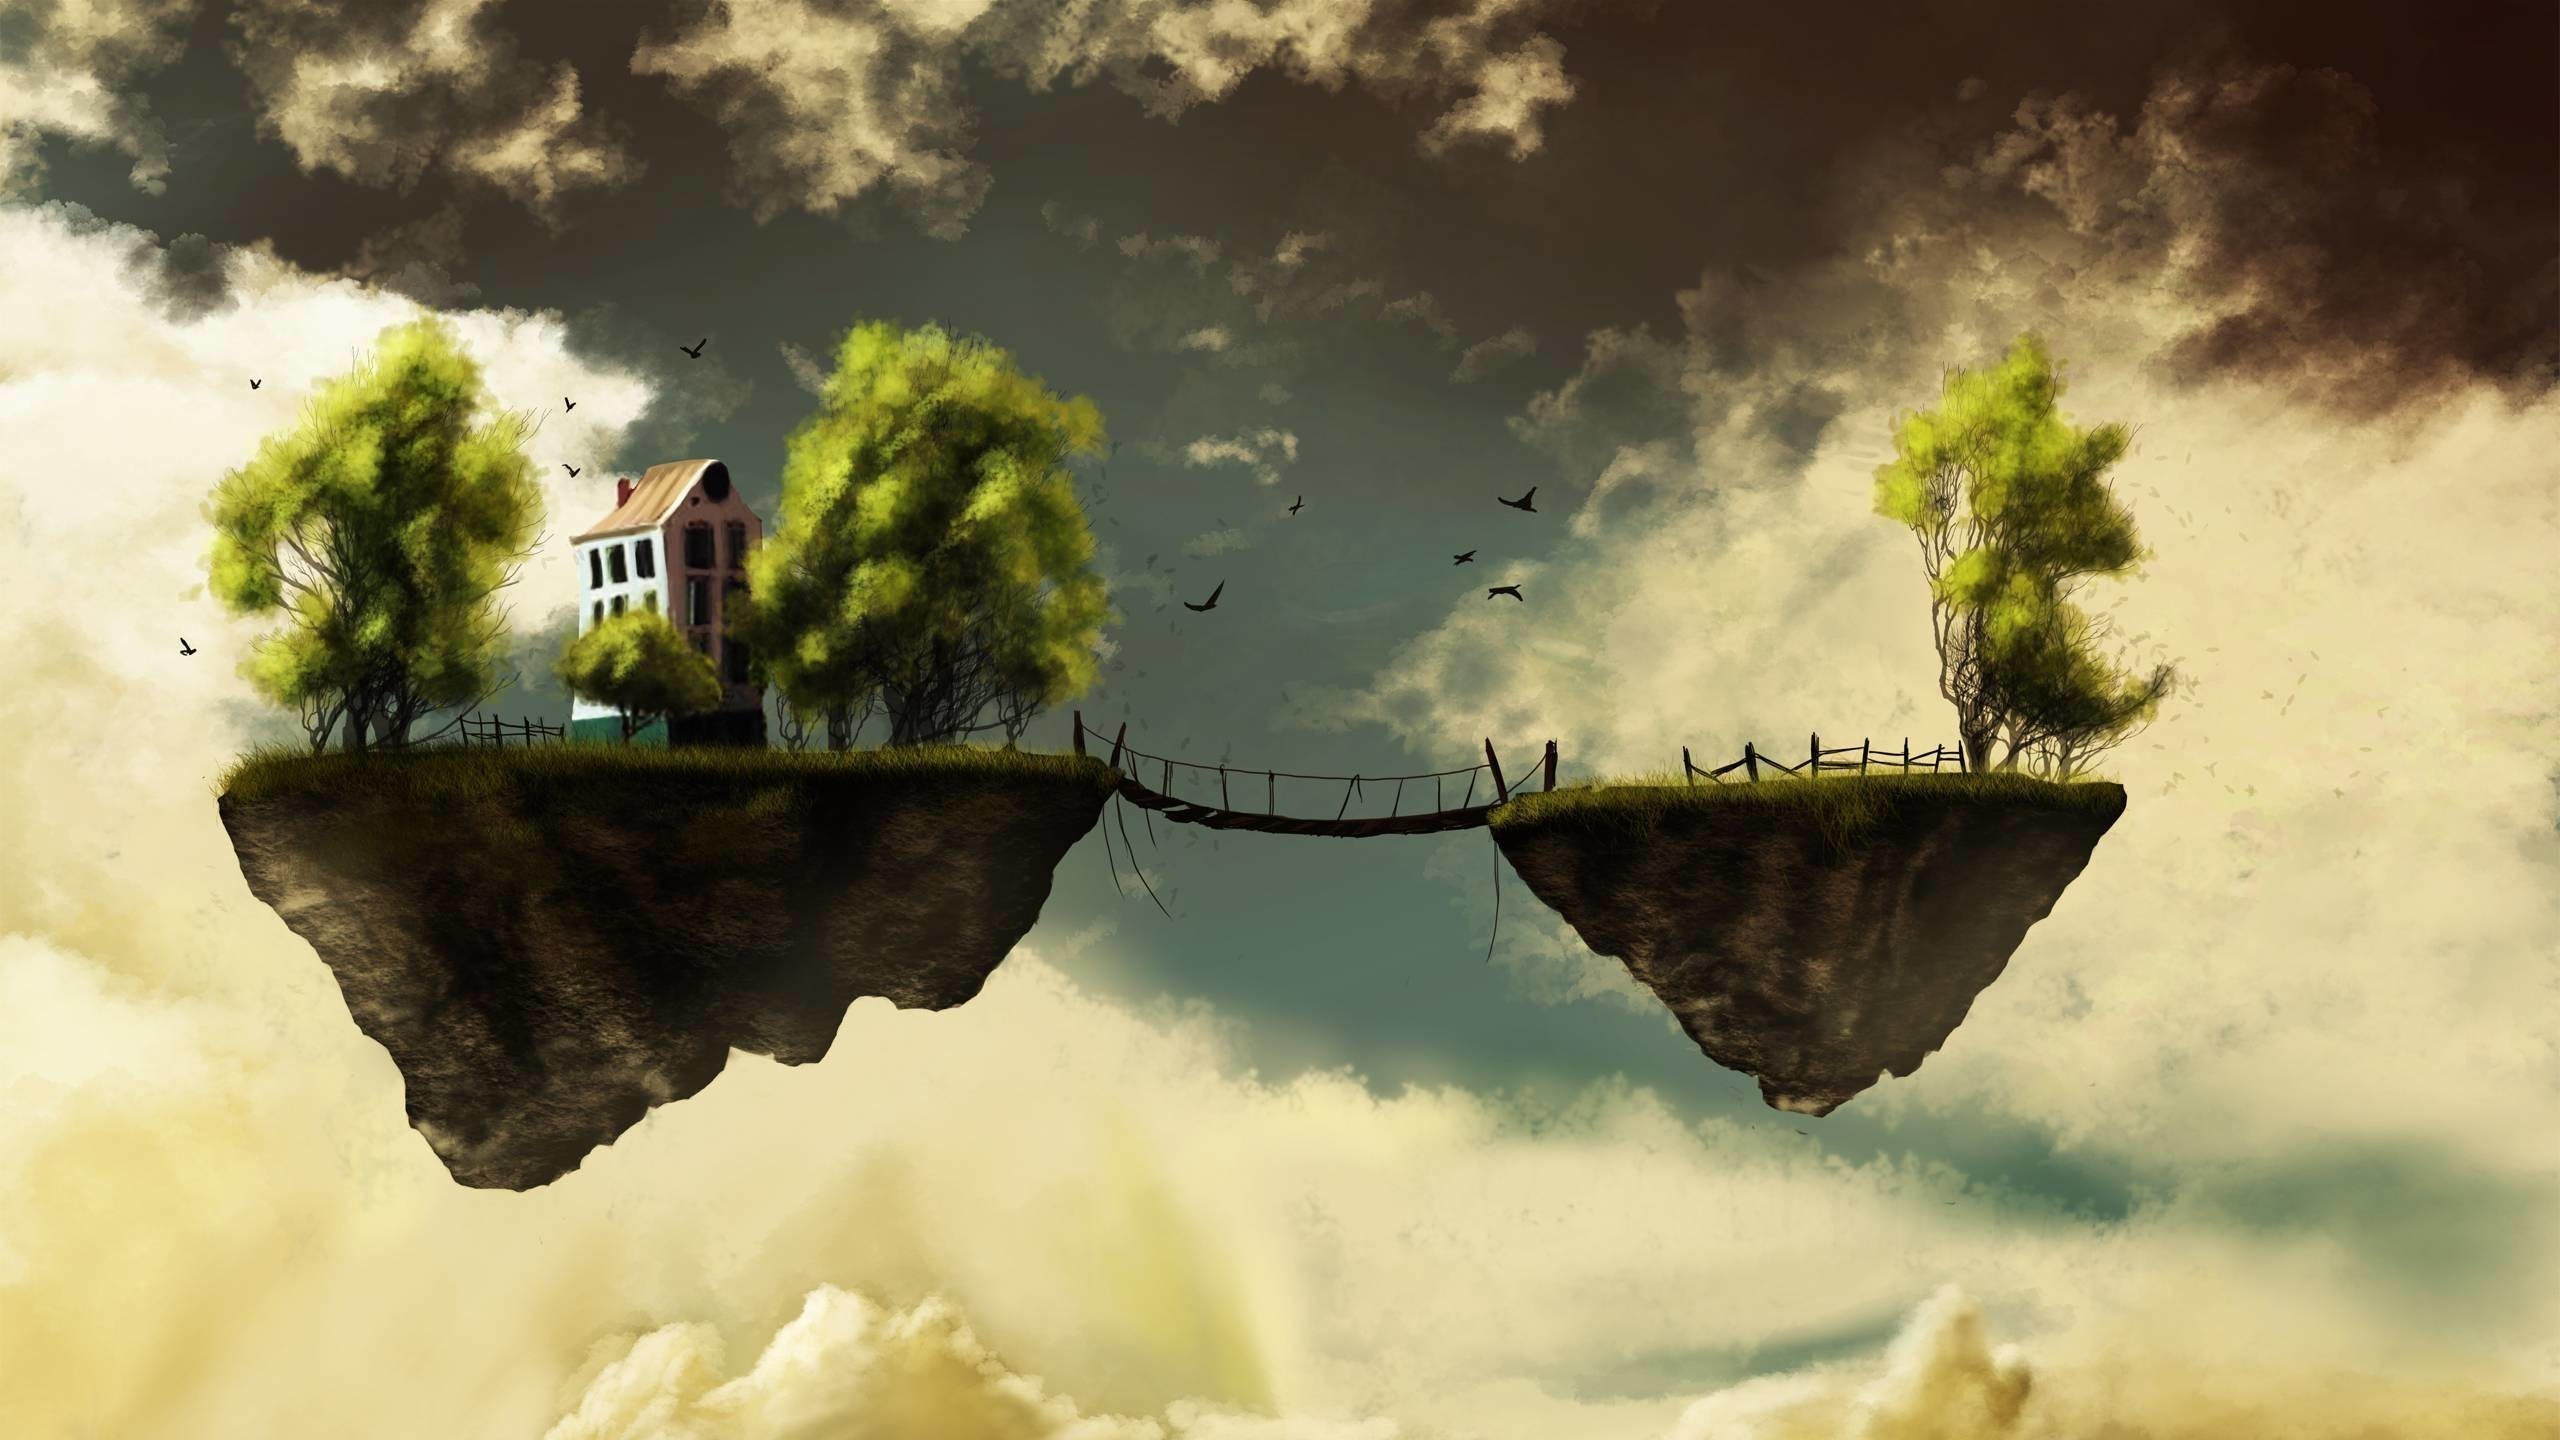 Data Src Trippy Landscape Wallpaper For Andro - Floating Island With Bridge - HD Wallpaper 